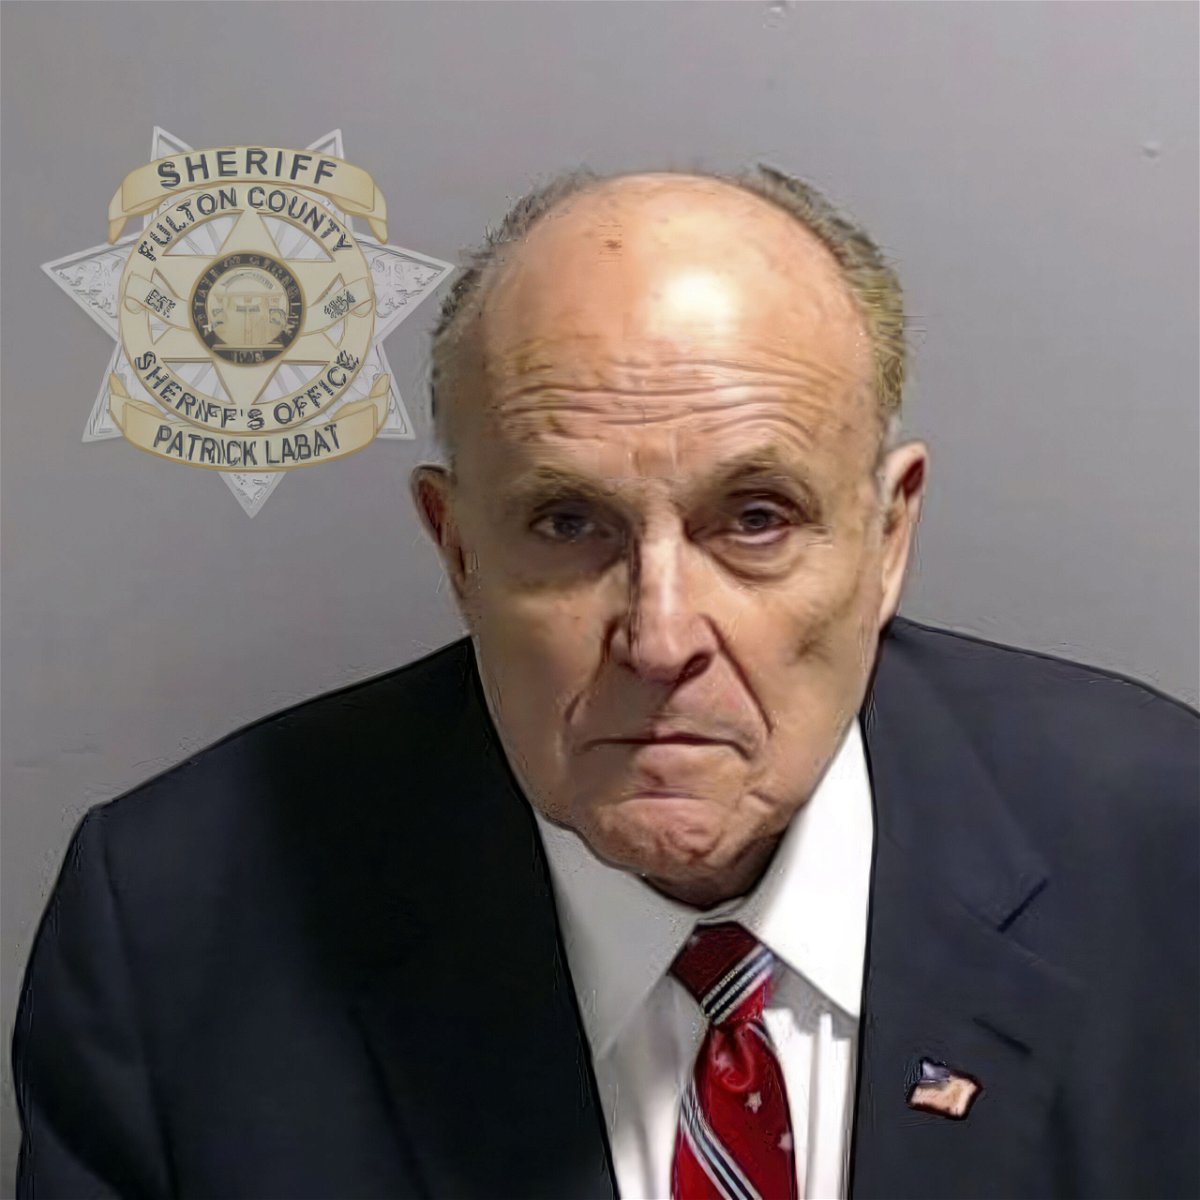 This booking photo provided by the Fulton County Sheriff's Office shows Rudy Giuliani on Wednesday, Aug. 23, 2023, in Atlanta, after he surrendered and was booked. Giuliani is charged alongside former President Donald Trump and 17 others, who are accused by Fulton County District Attorney Fani Willis of scheming to subvert the will of Georgia voters to keep the Republican president in the White House after he lost to Democrat Joe Biden.